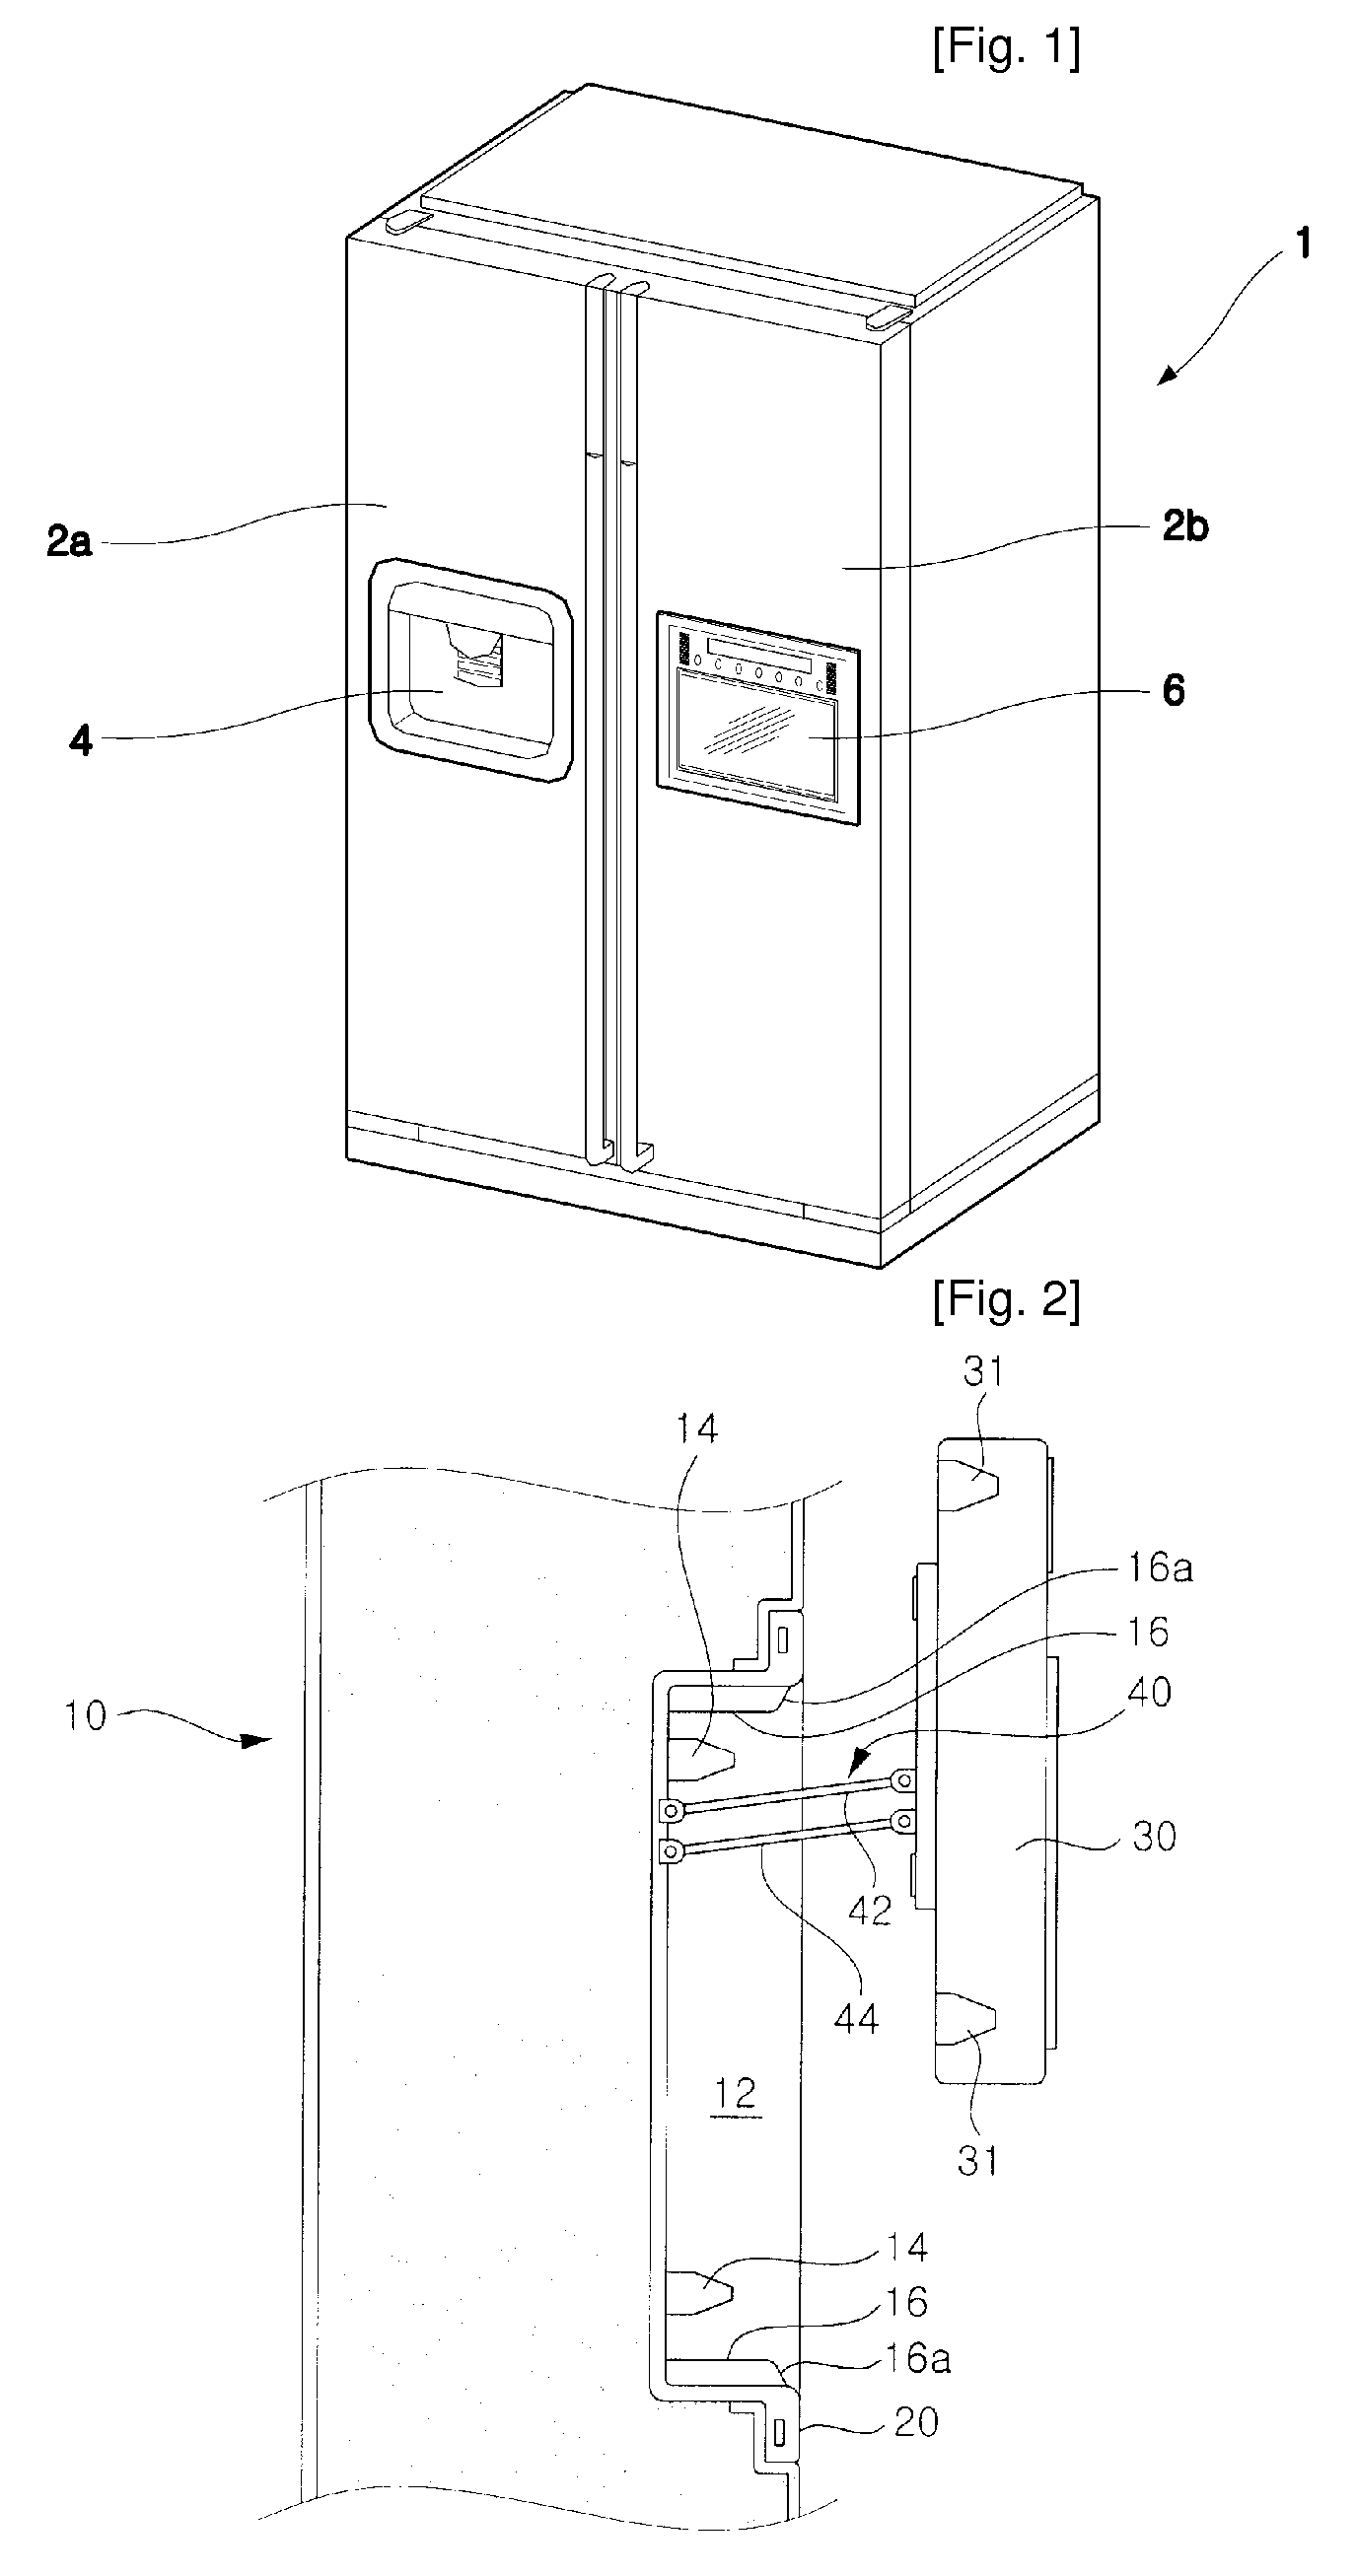 Display Unit Installing Structure for Refrigerator